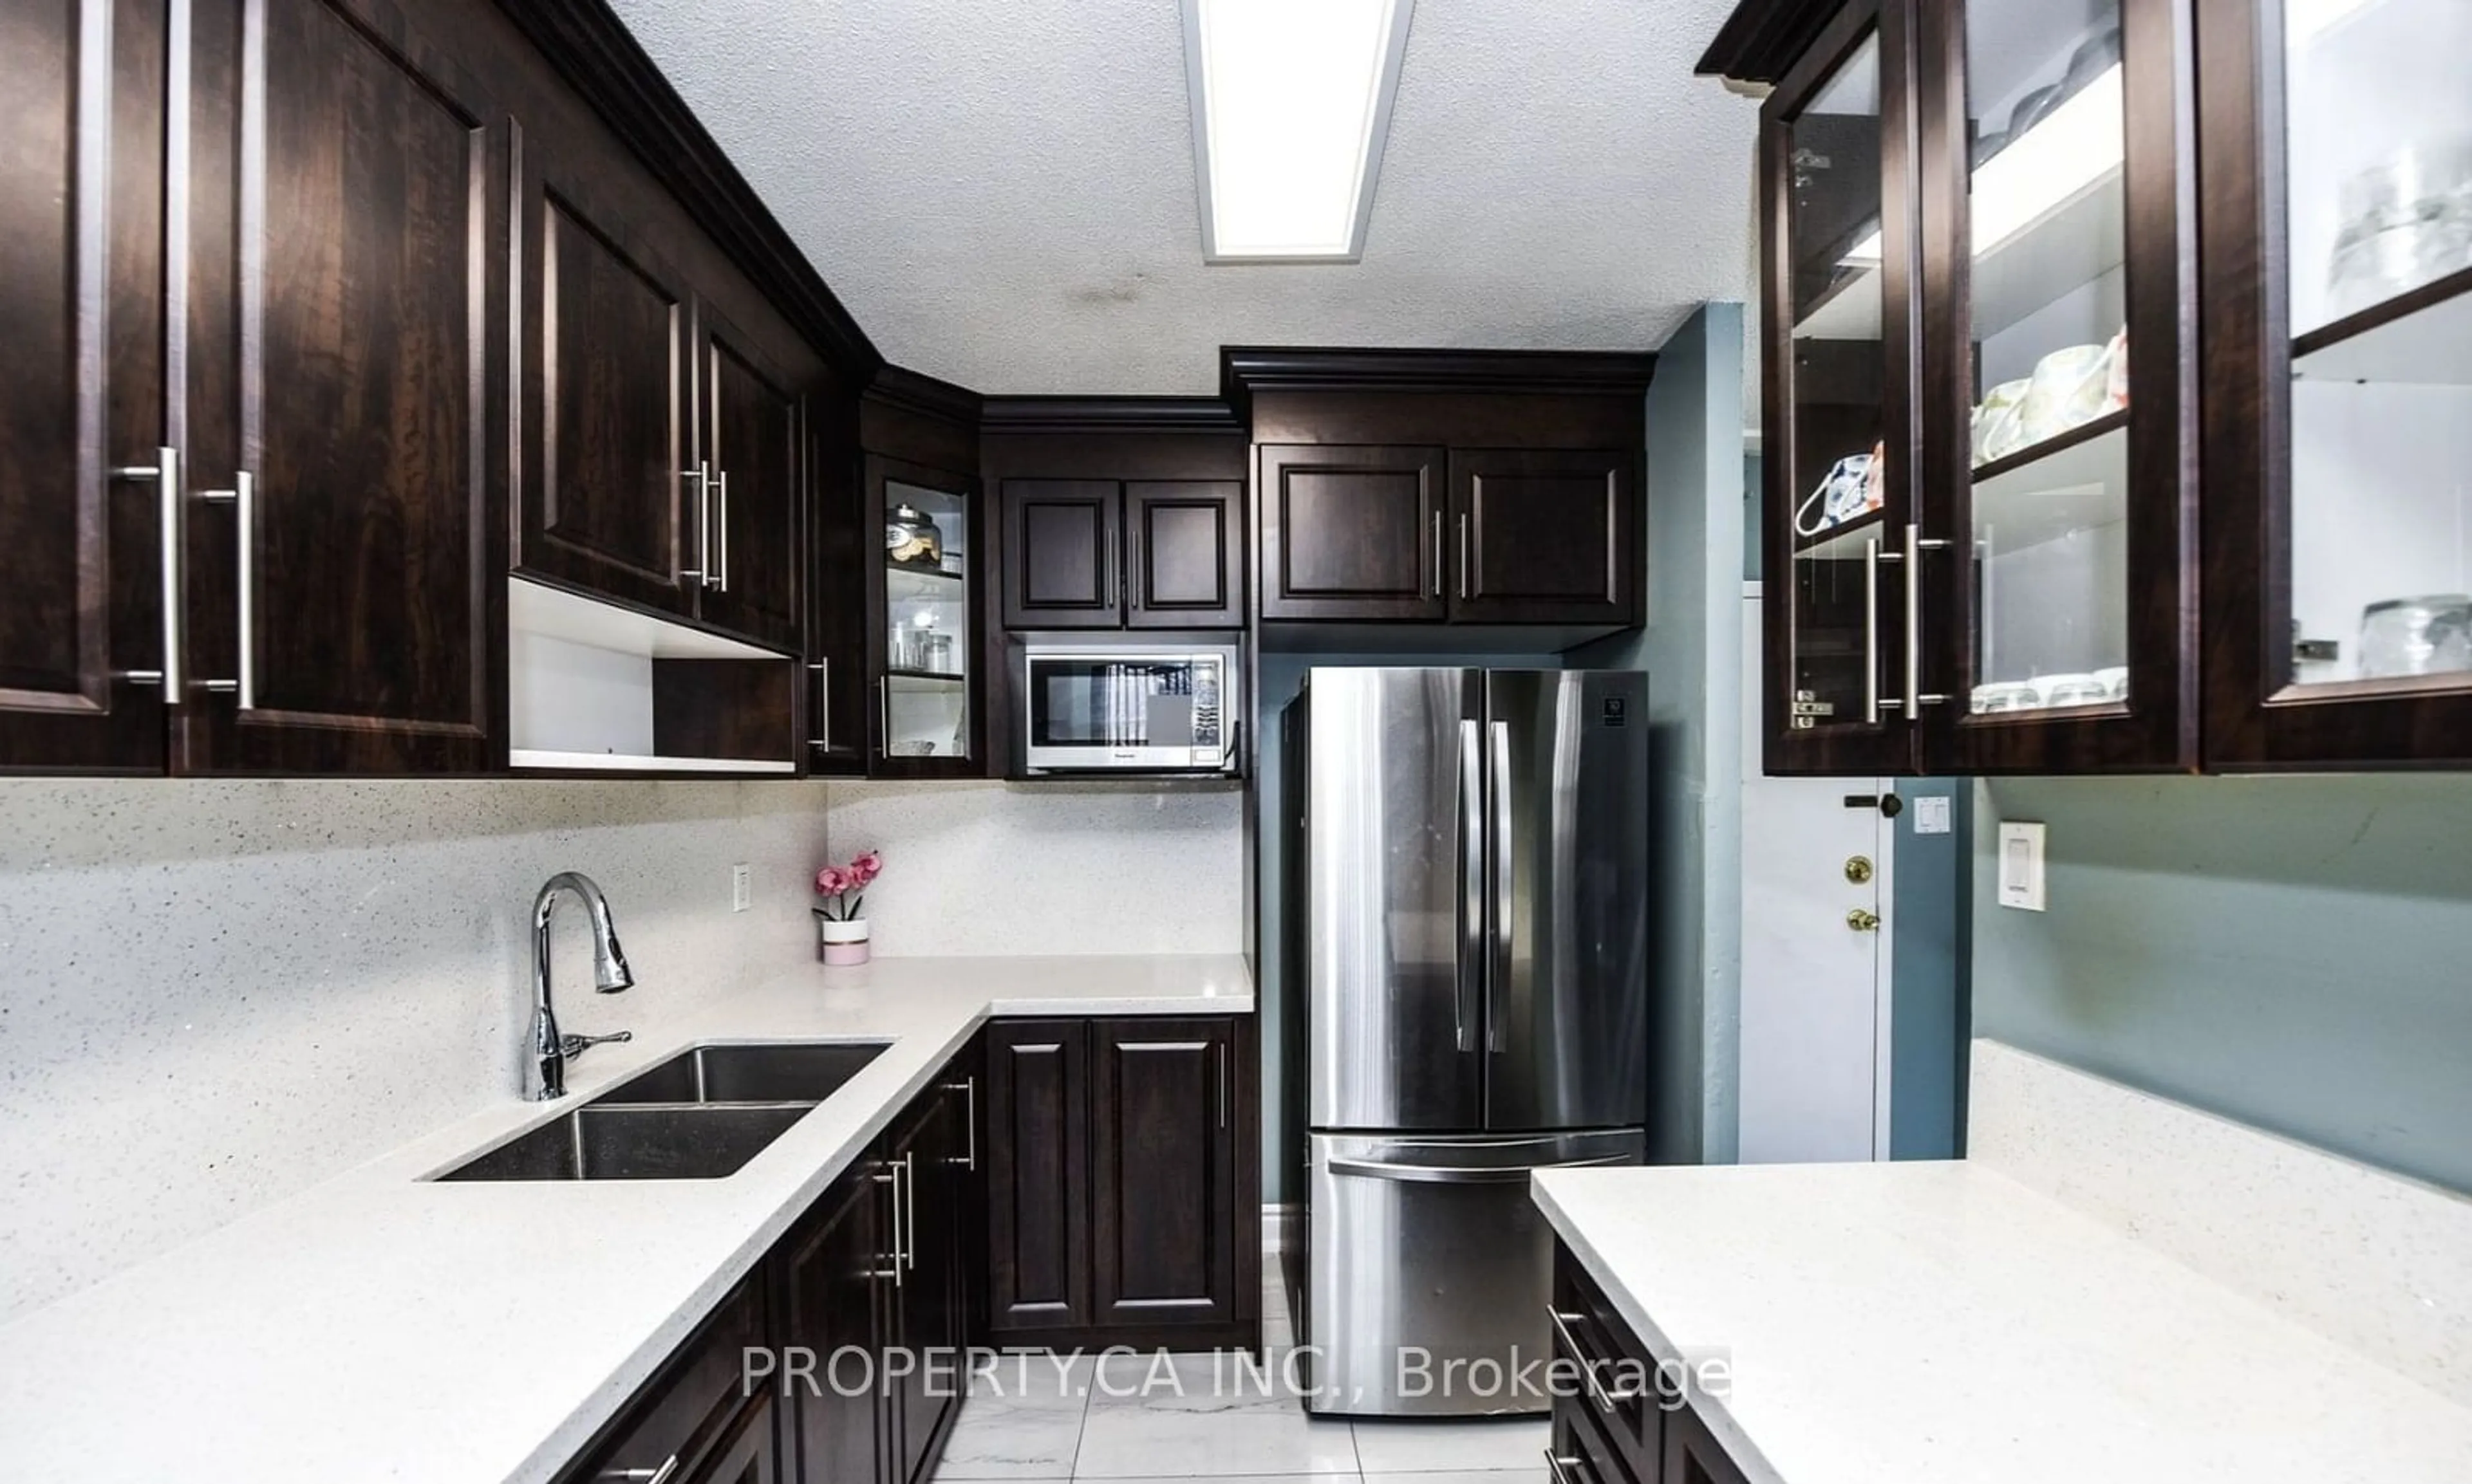 Contemporary kitchen for 1050 Stainton Dr #102, Mississauga Ontario L5C 2T7